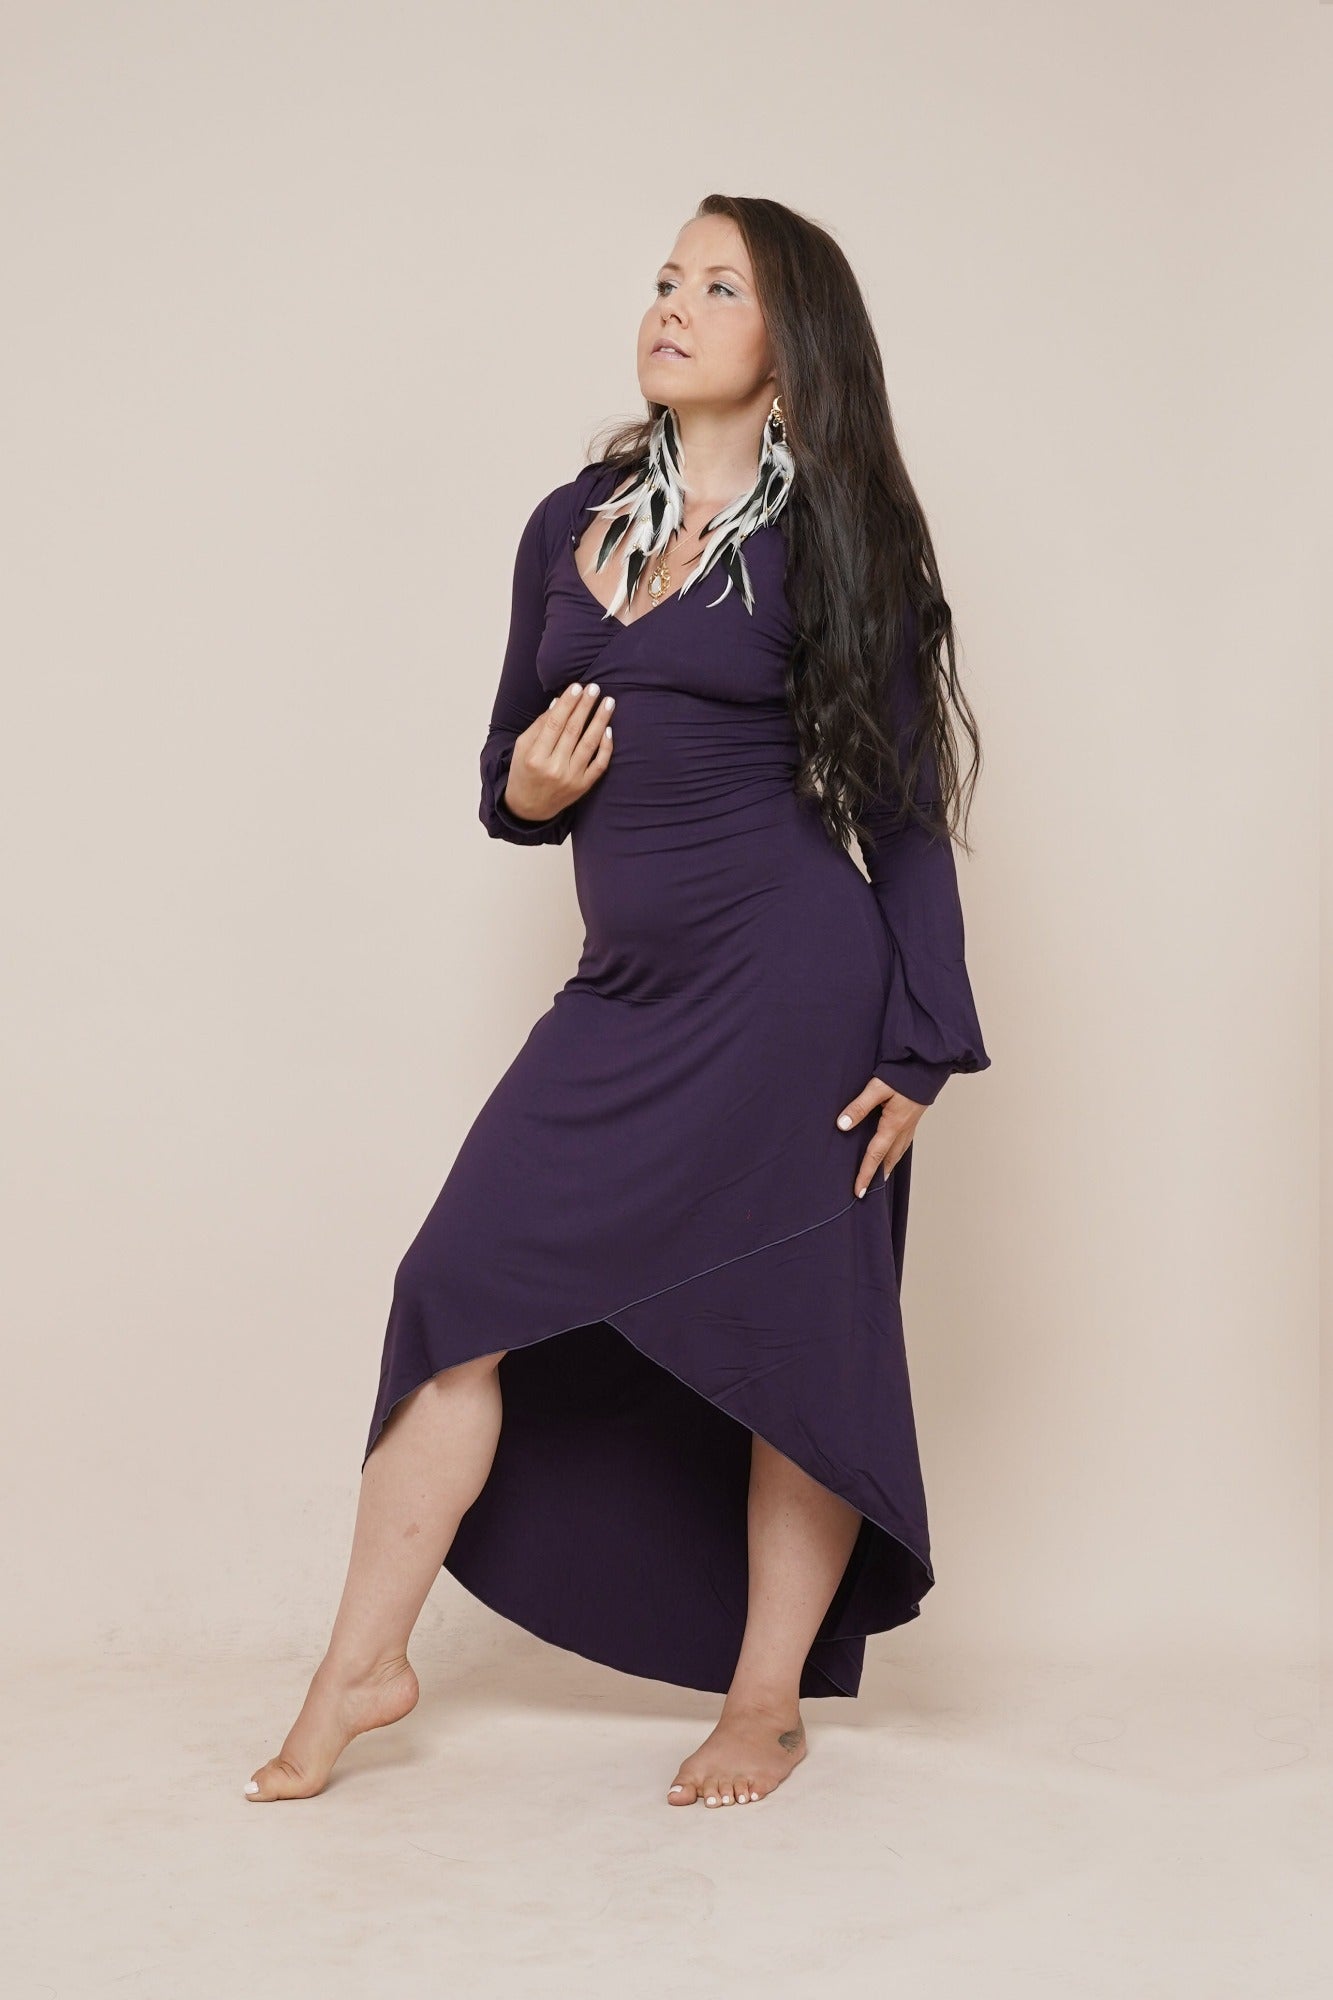 Long dress with long puffy sleeves and removable hood named Mystic in color plum by Bohemian Goddess.